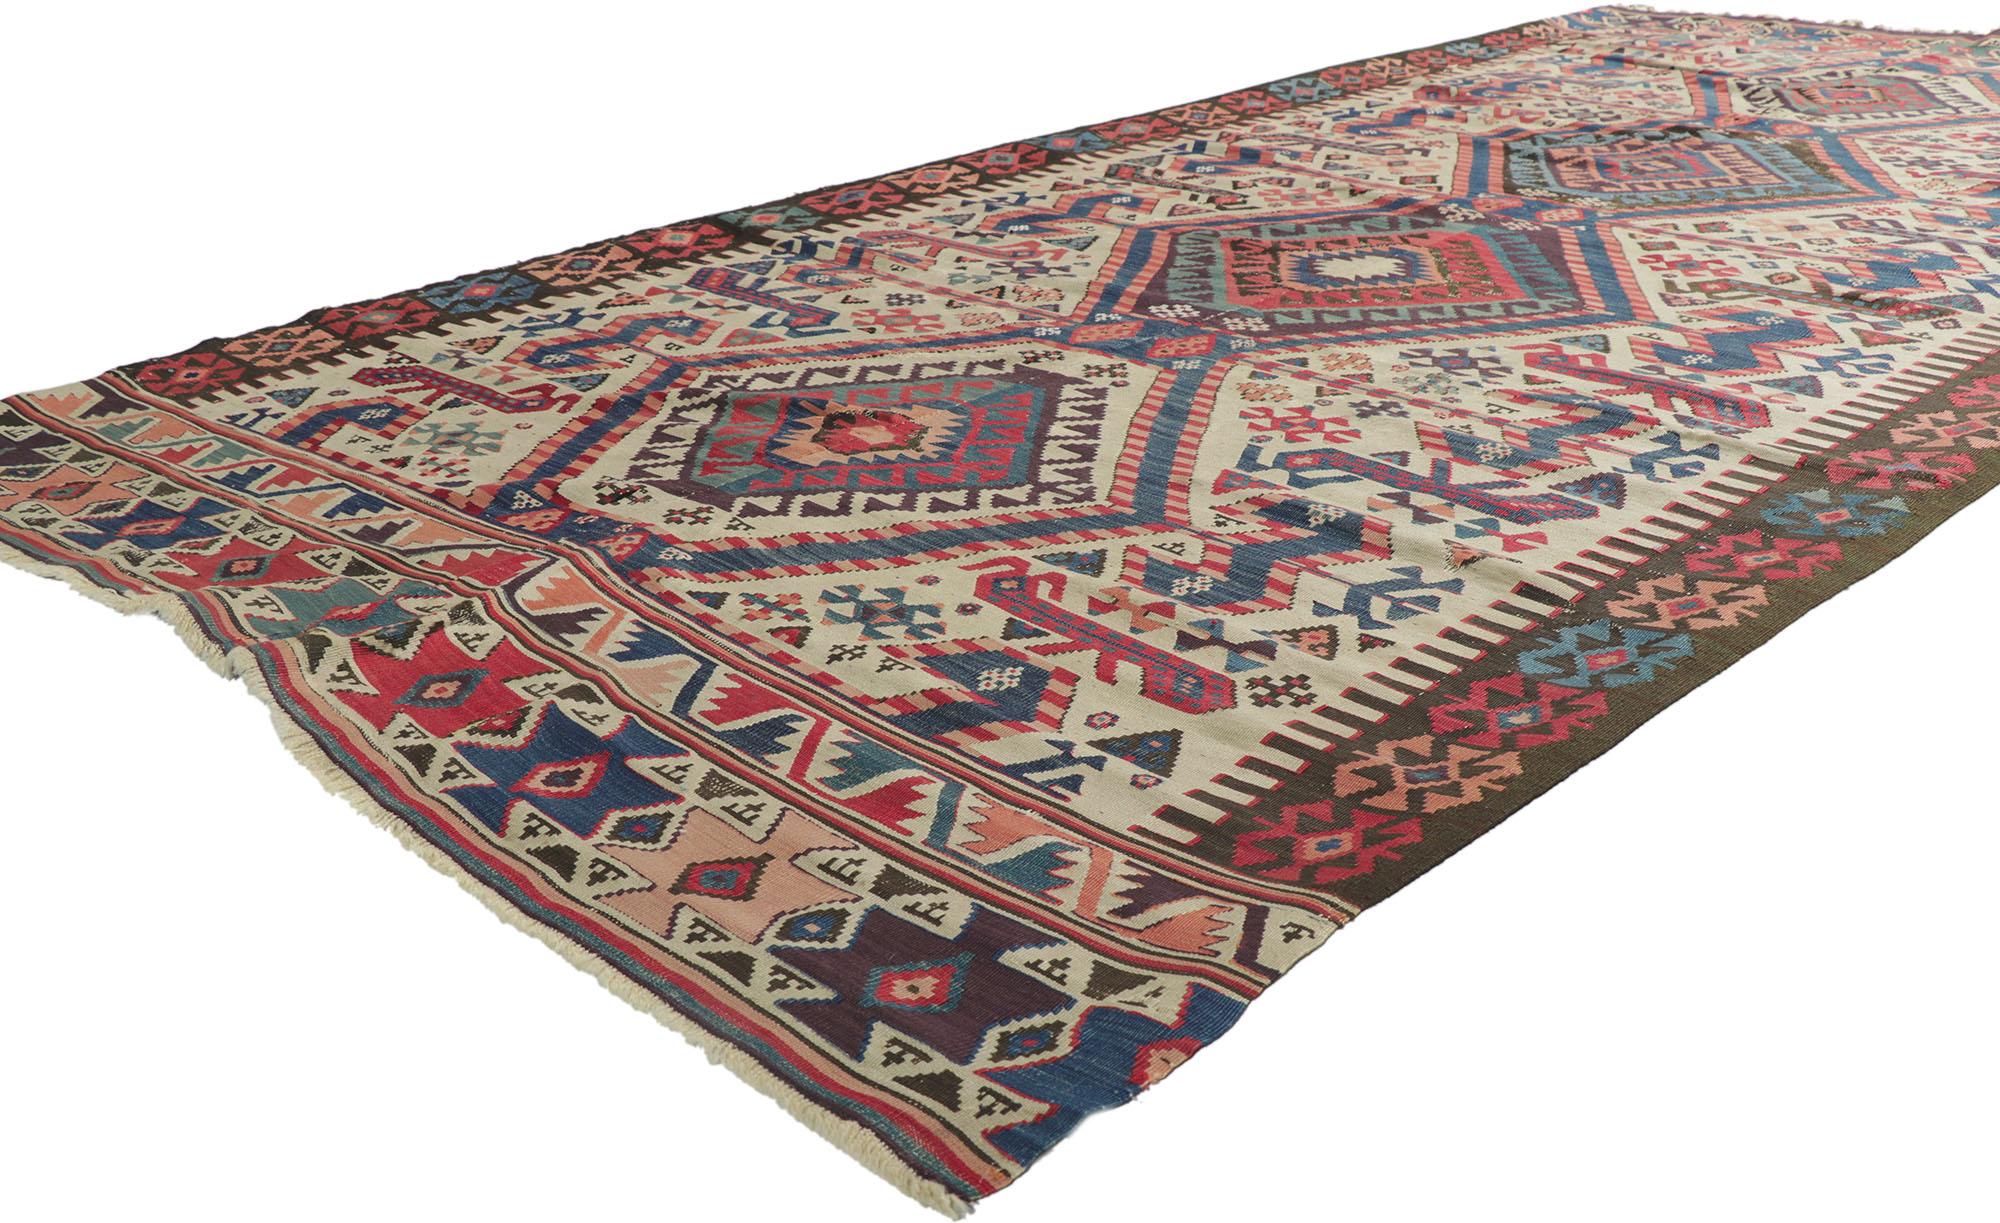 78190 Antique Caucasian Kilim rug, 05'01 x 10'09. From warming up modern interiors and adding panache to formal areas, this hand-woven wool antique Caucasian kilim rug seamlessly blends with eclectic areas and is well suited for a range of